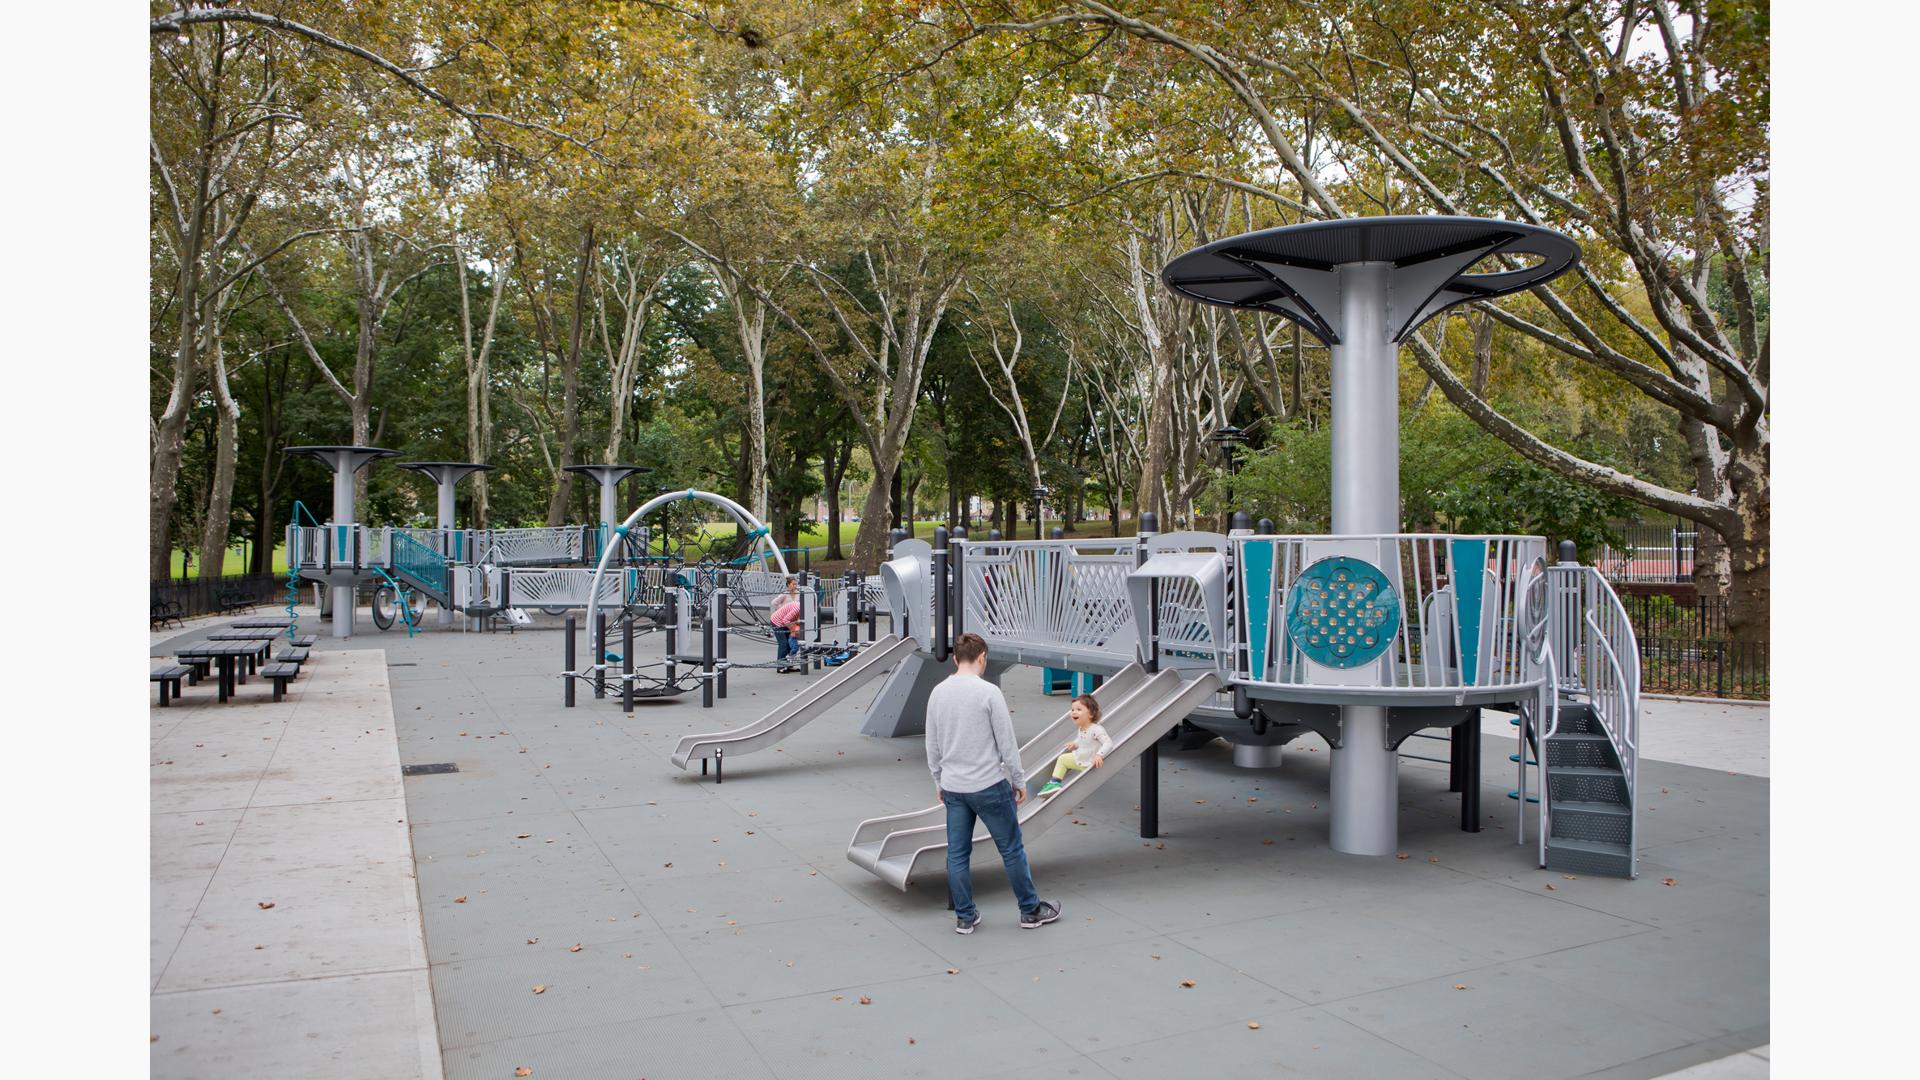 A mother stands by watching as her daughter slides down a metal dual lane slide on a futuristic designed inclusive playground surrounded by a grove of trees. 